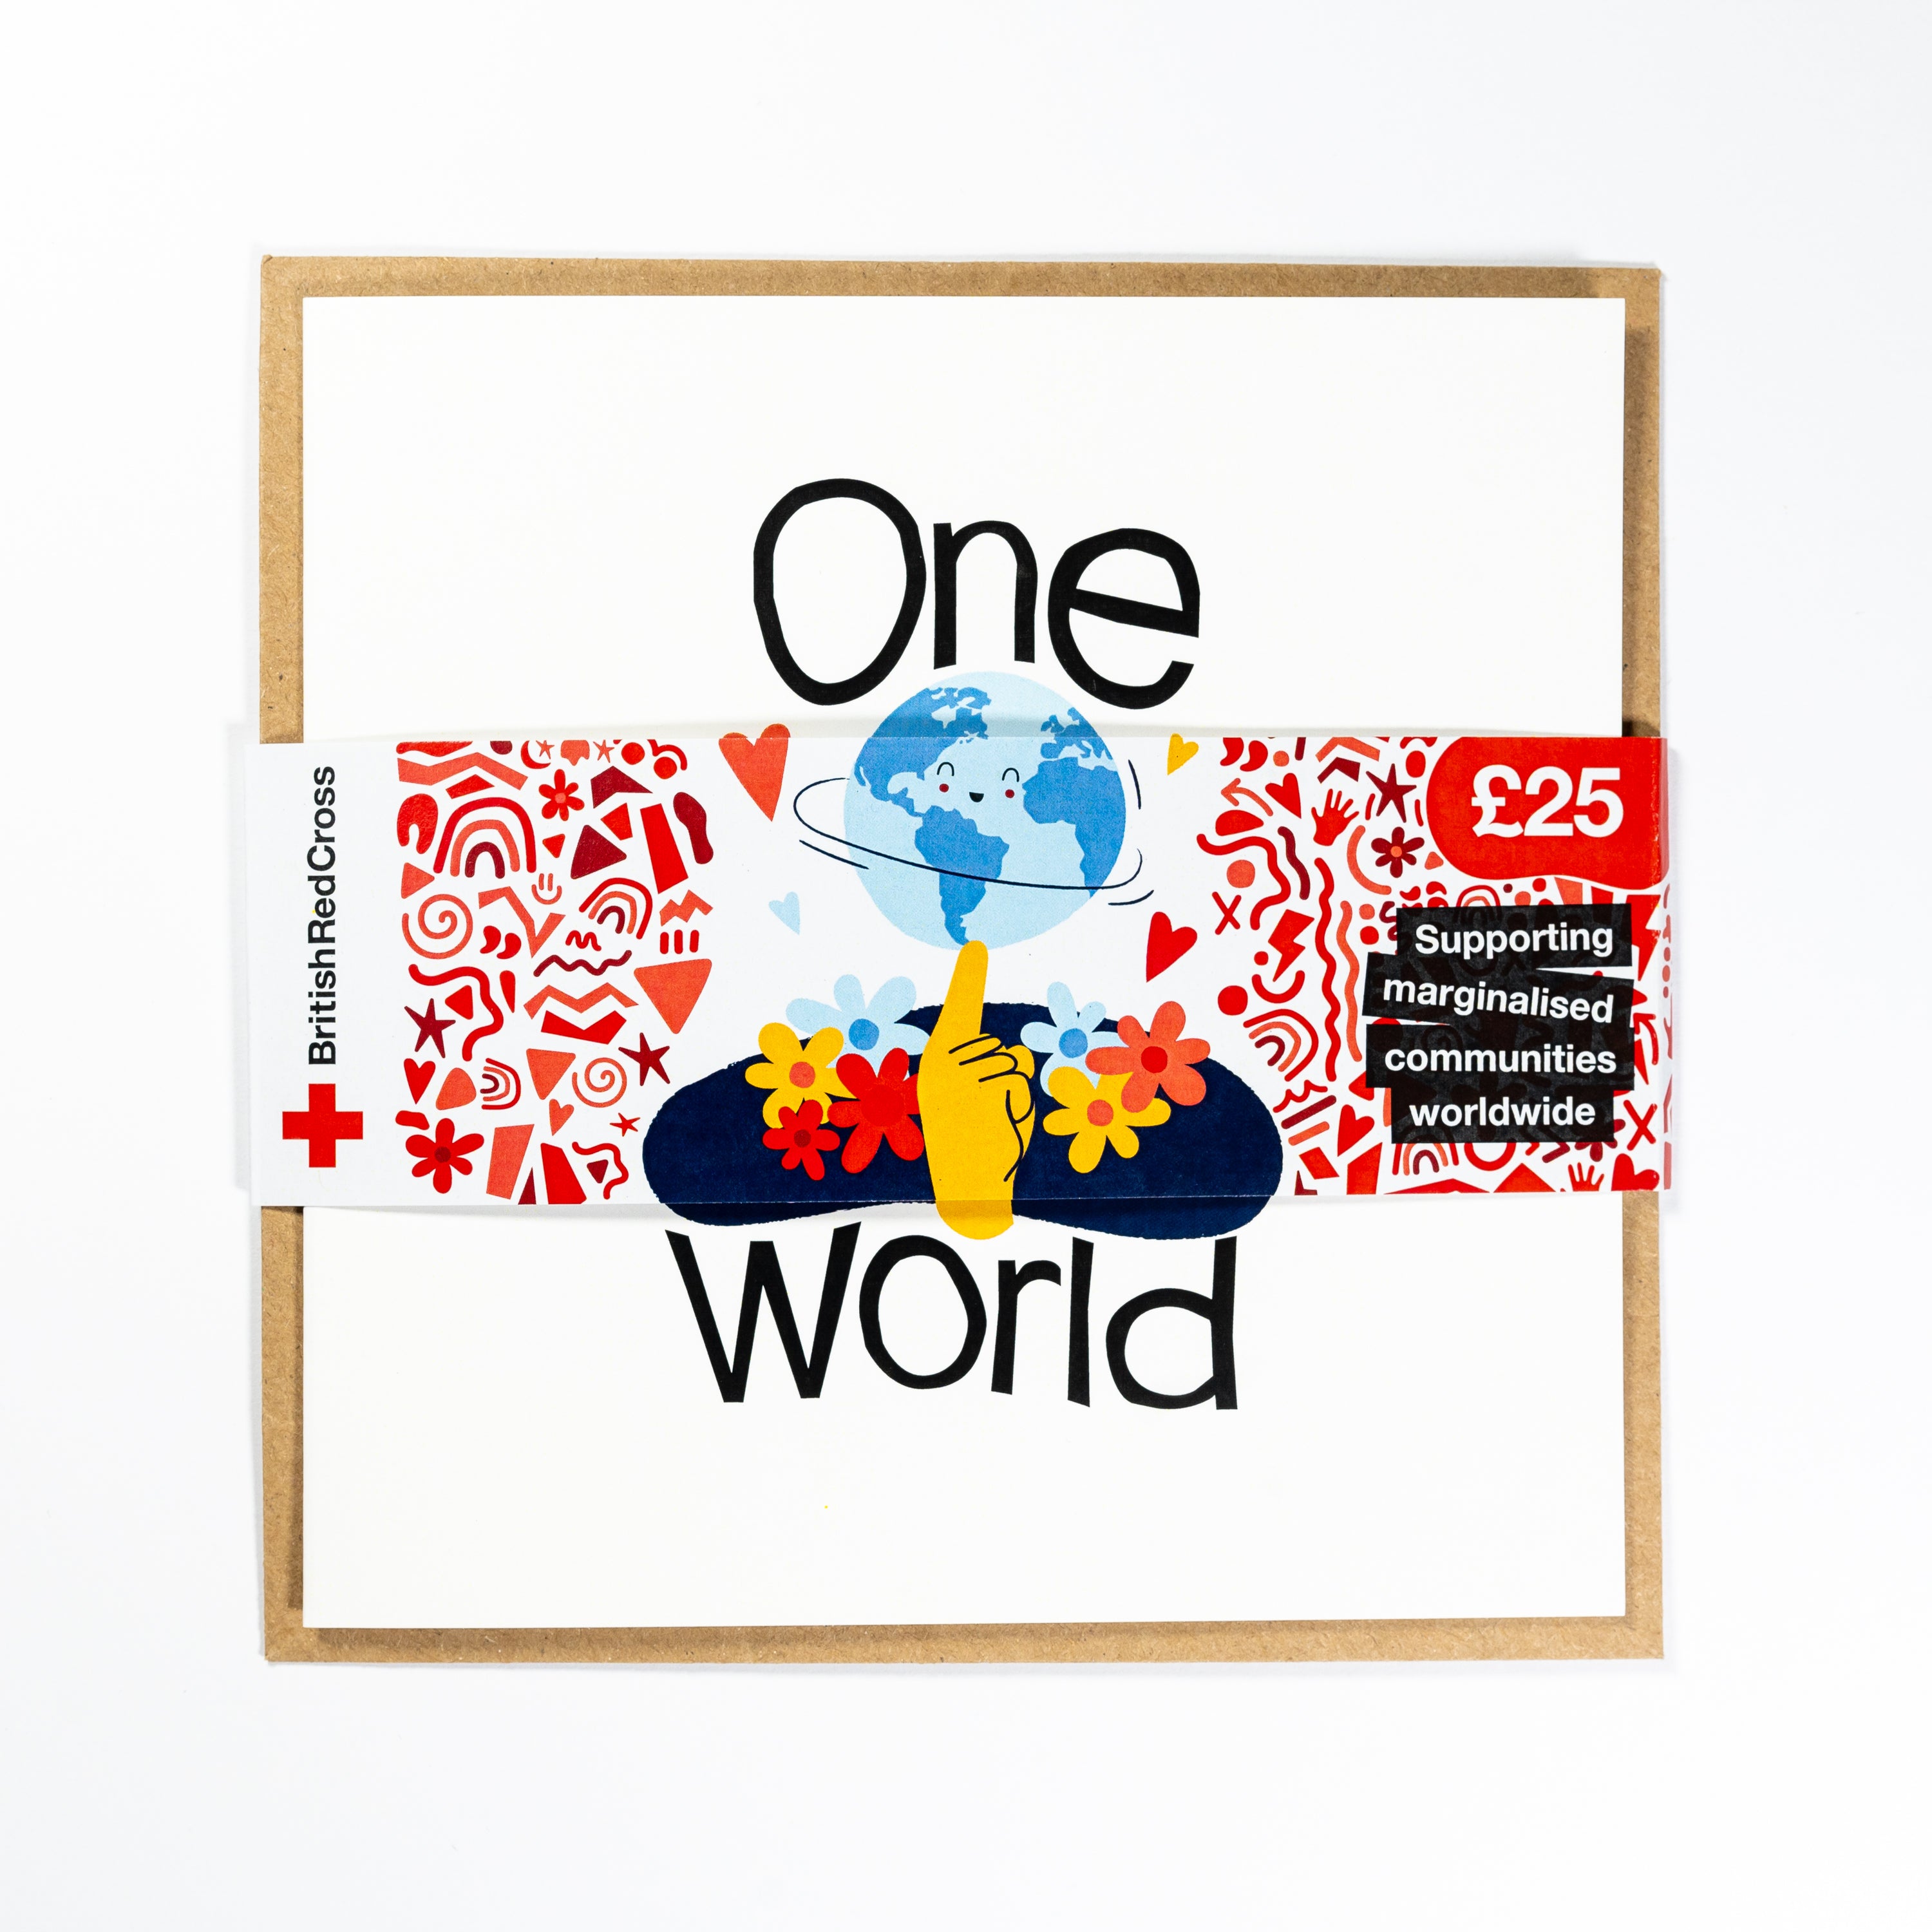 One World | Greeting Card | Kindness Gifted